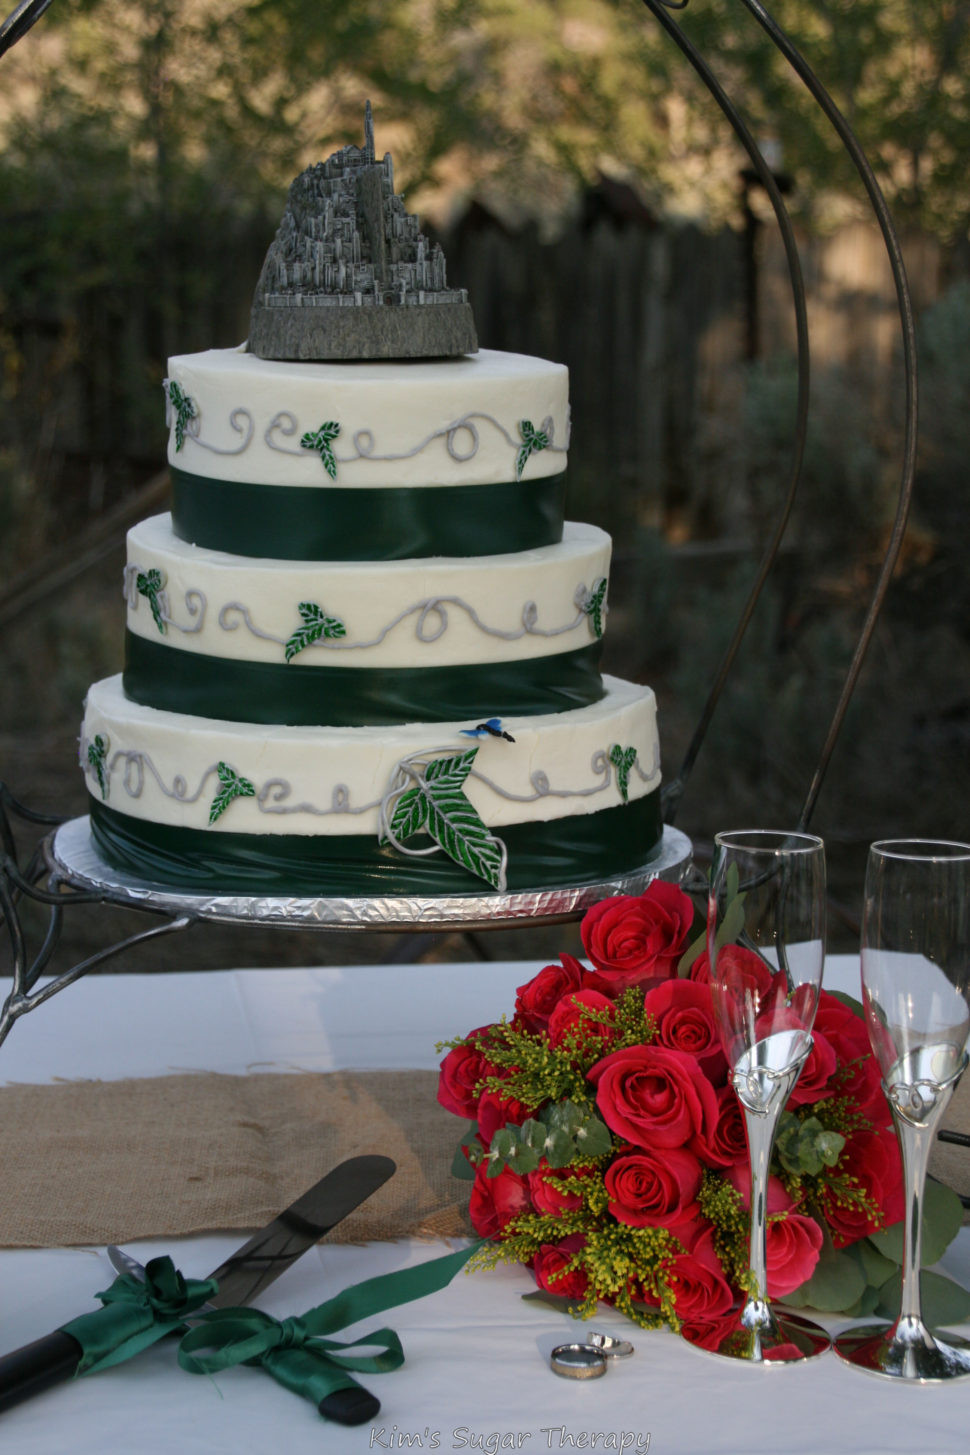 Lord Of The Rings Wedding Cake
 My Wedding Cake Lord The Rings Themed – Kim s Sugar